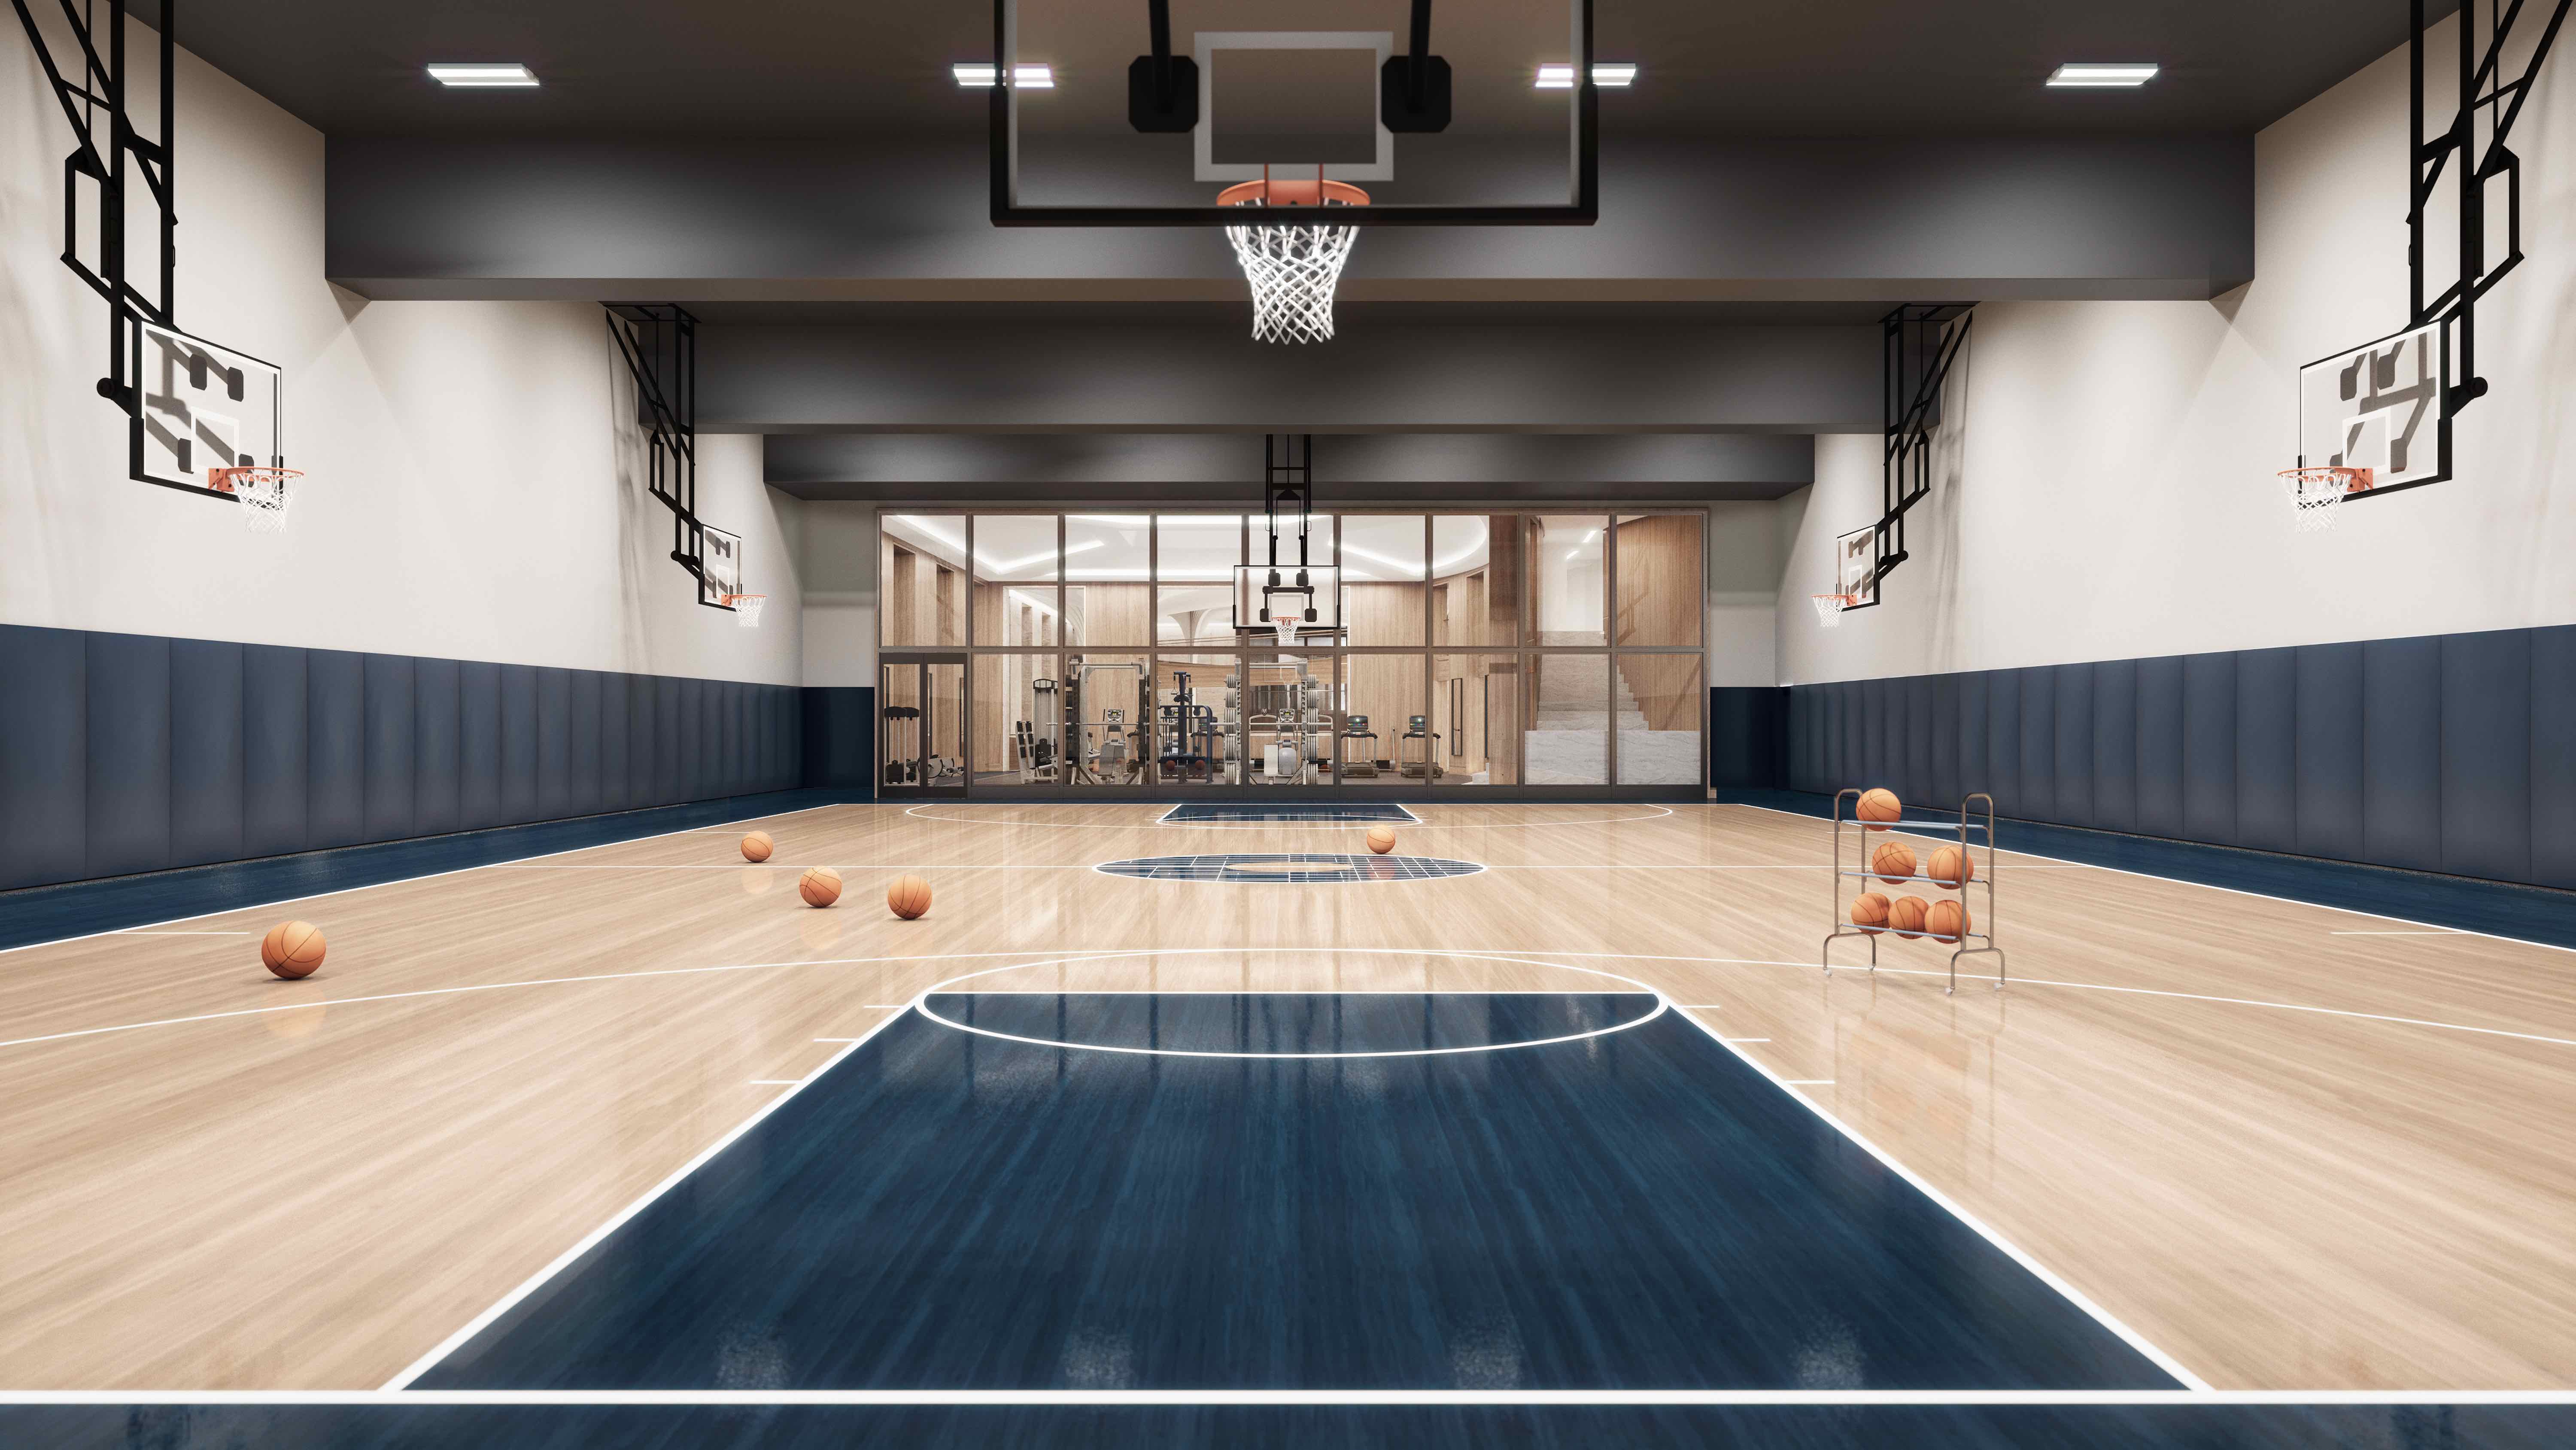 Celebrate March Madness With These Five Epic Basketball Courts - Haute